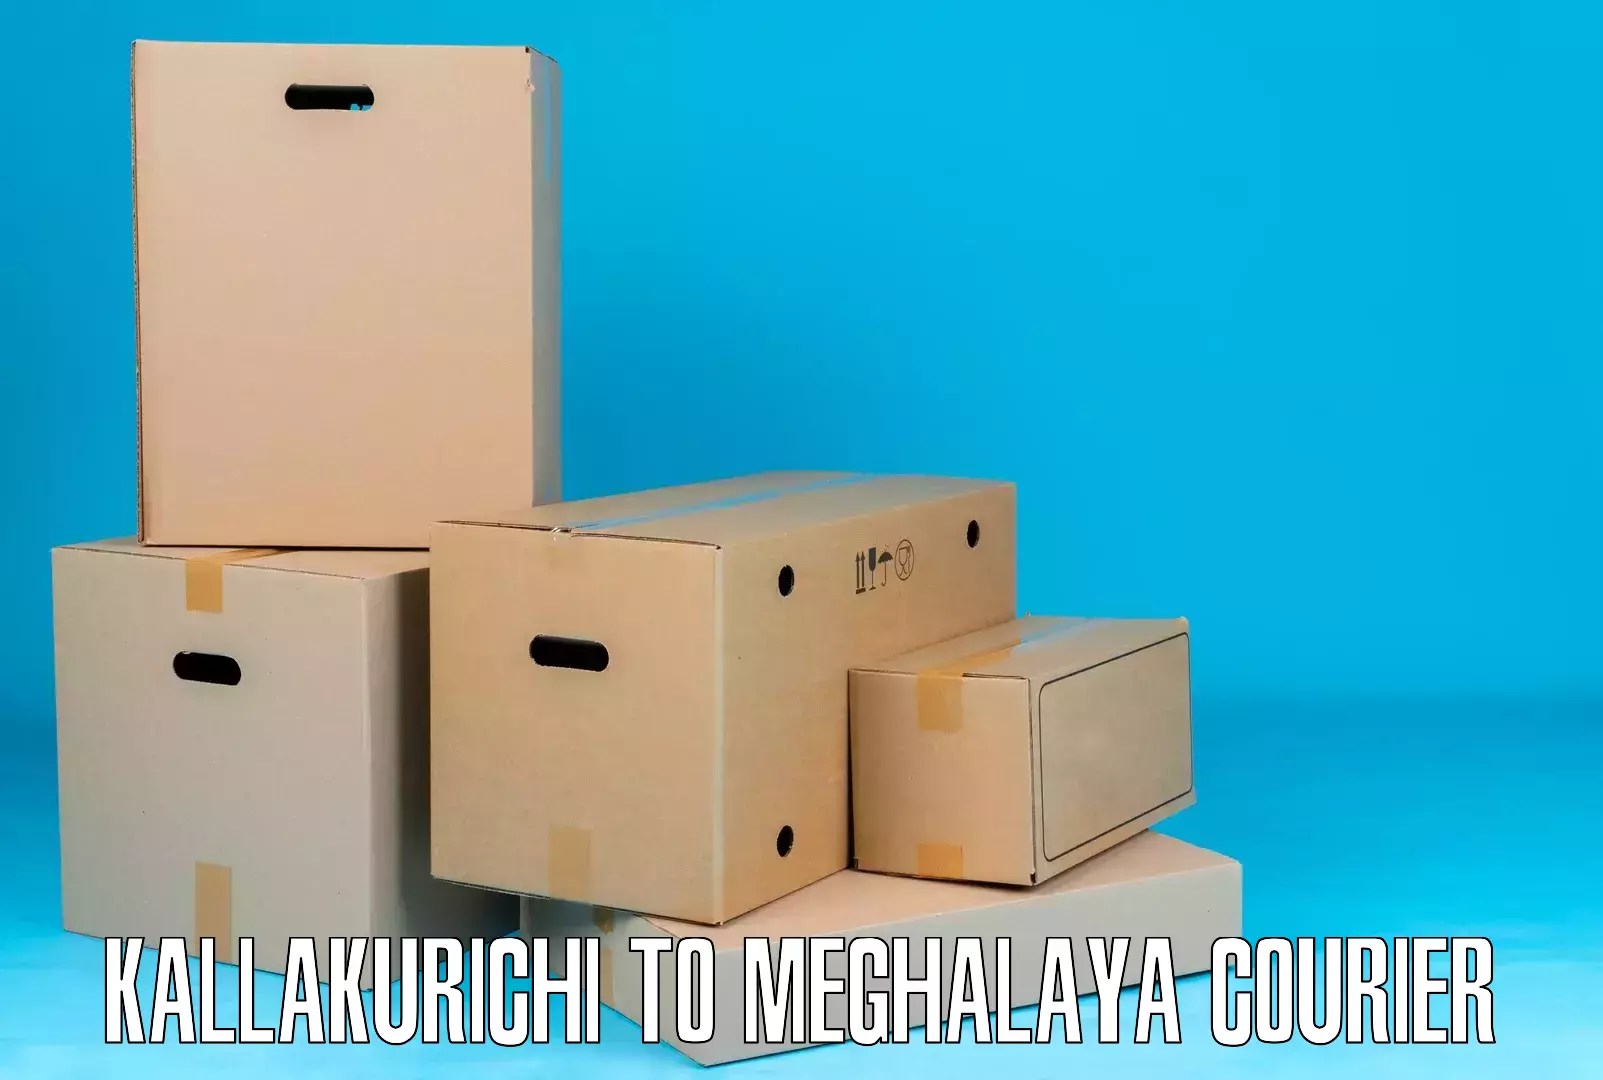 Courier rate comparison in Kallakurichi to Meghalaya